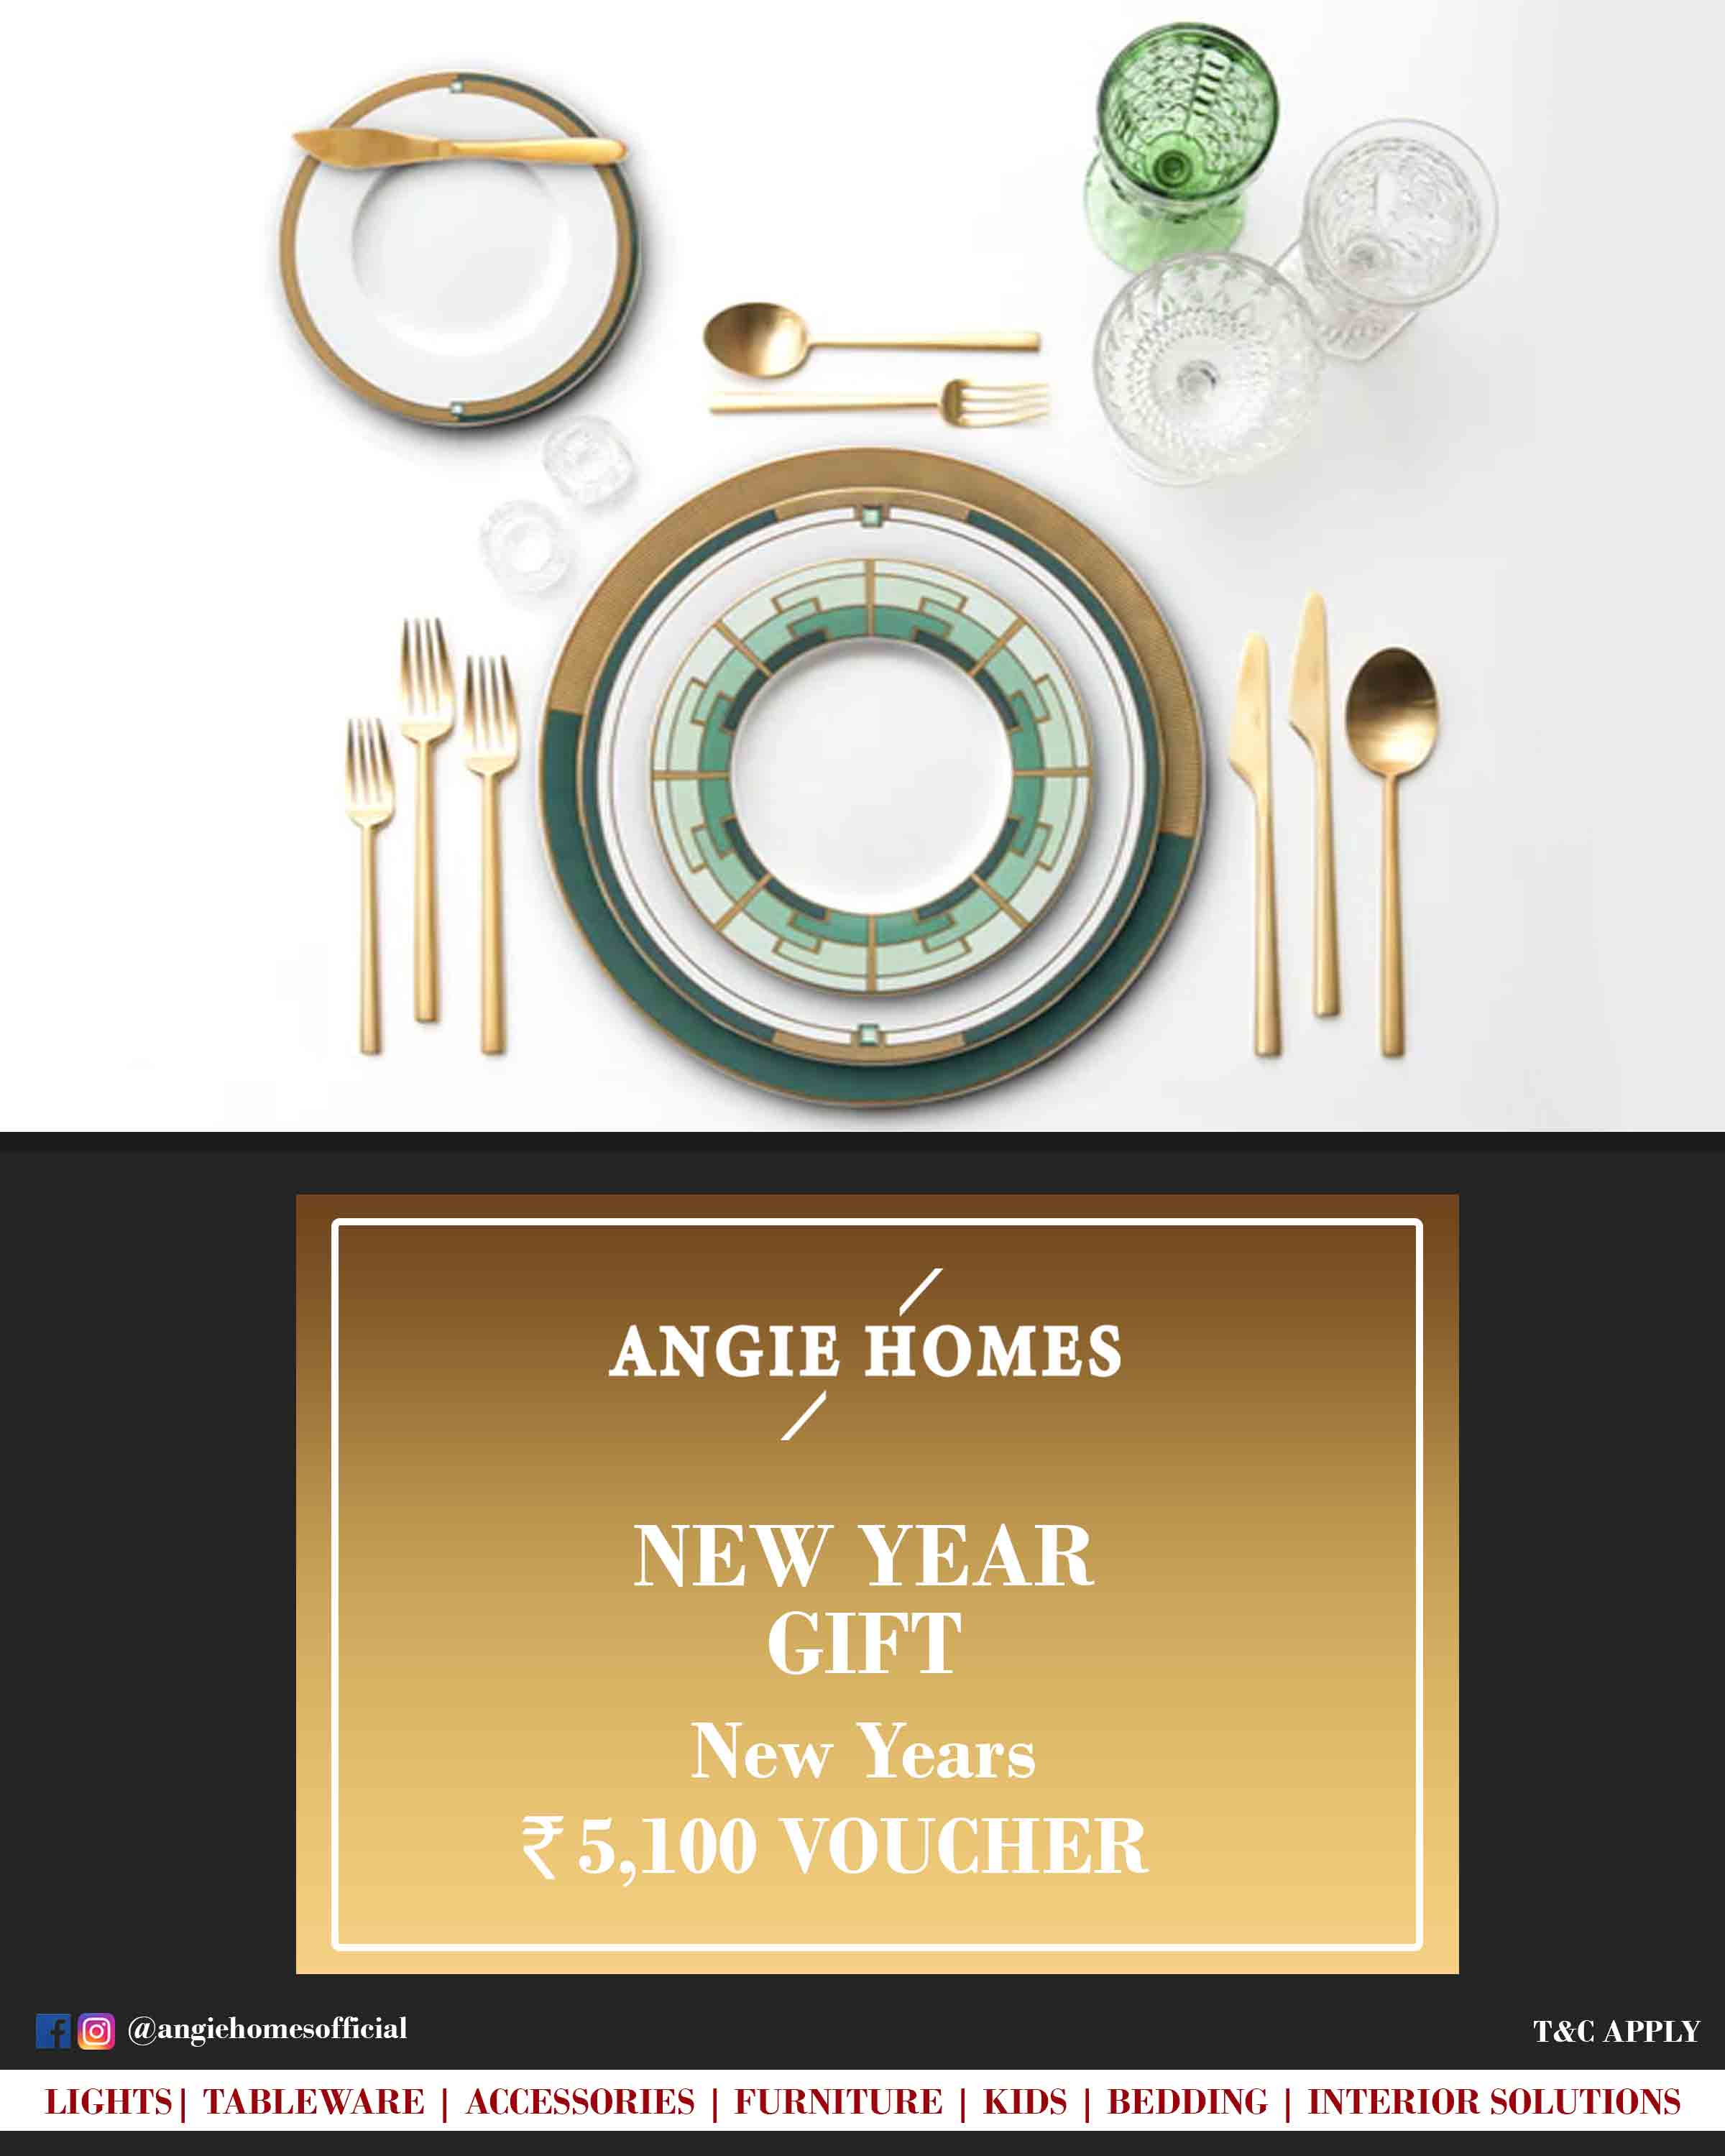 Online New Year Gift Voucher for Tableware | Dinner Set with Cutlery ANGIE HOMES